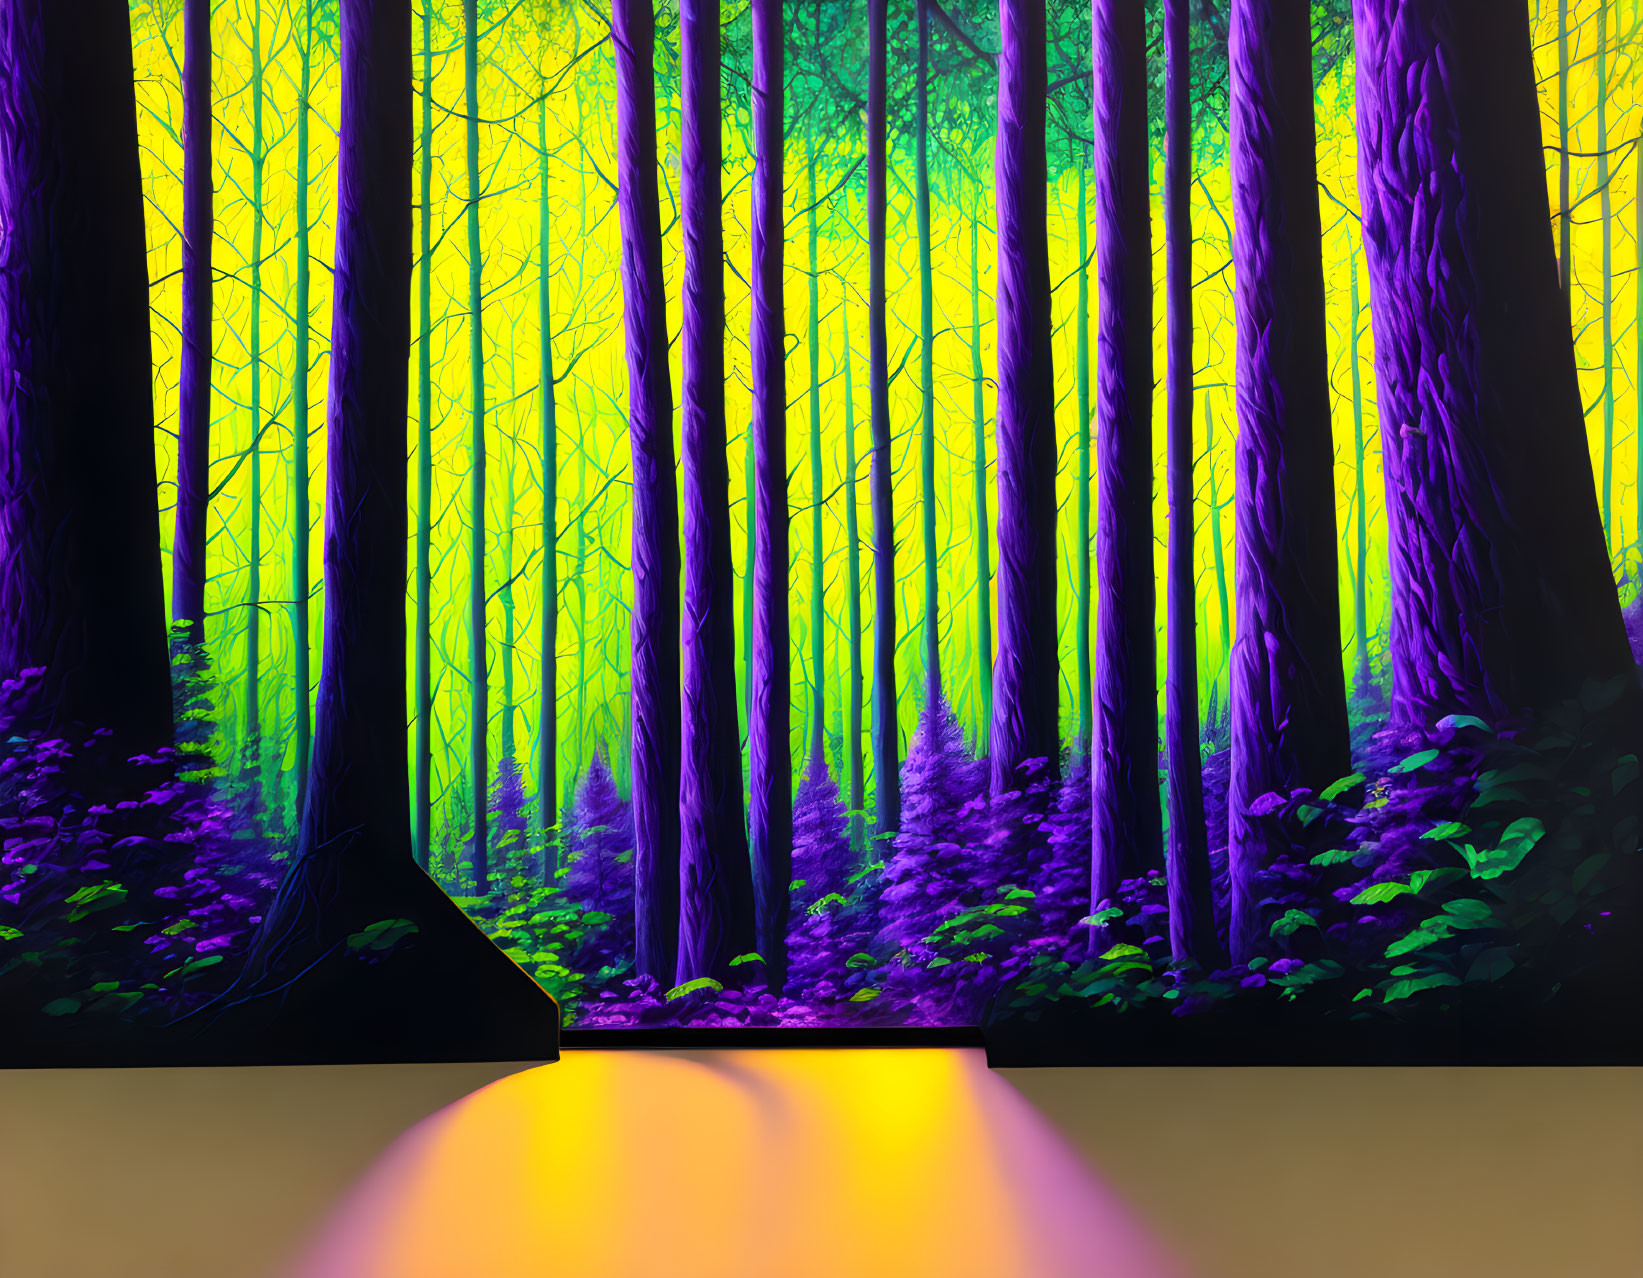 Surreal forest with purple and green hues under warm spotlight